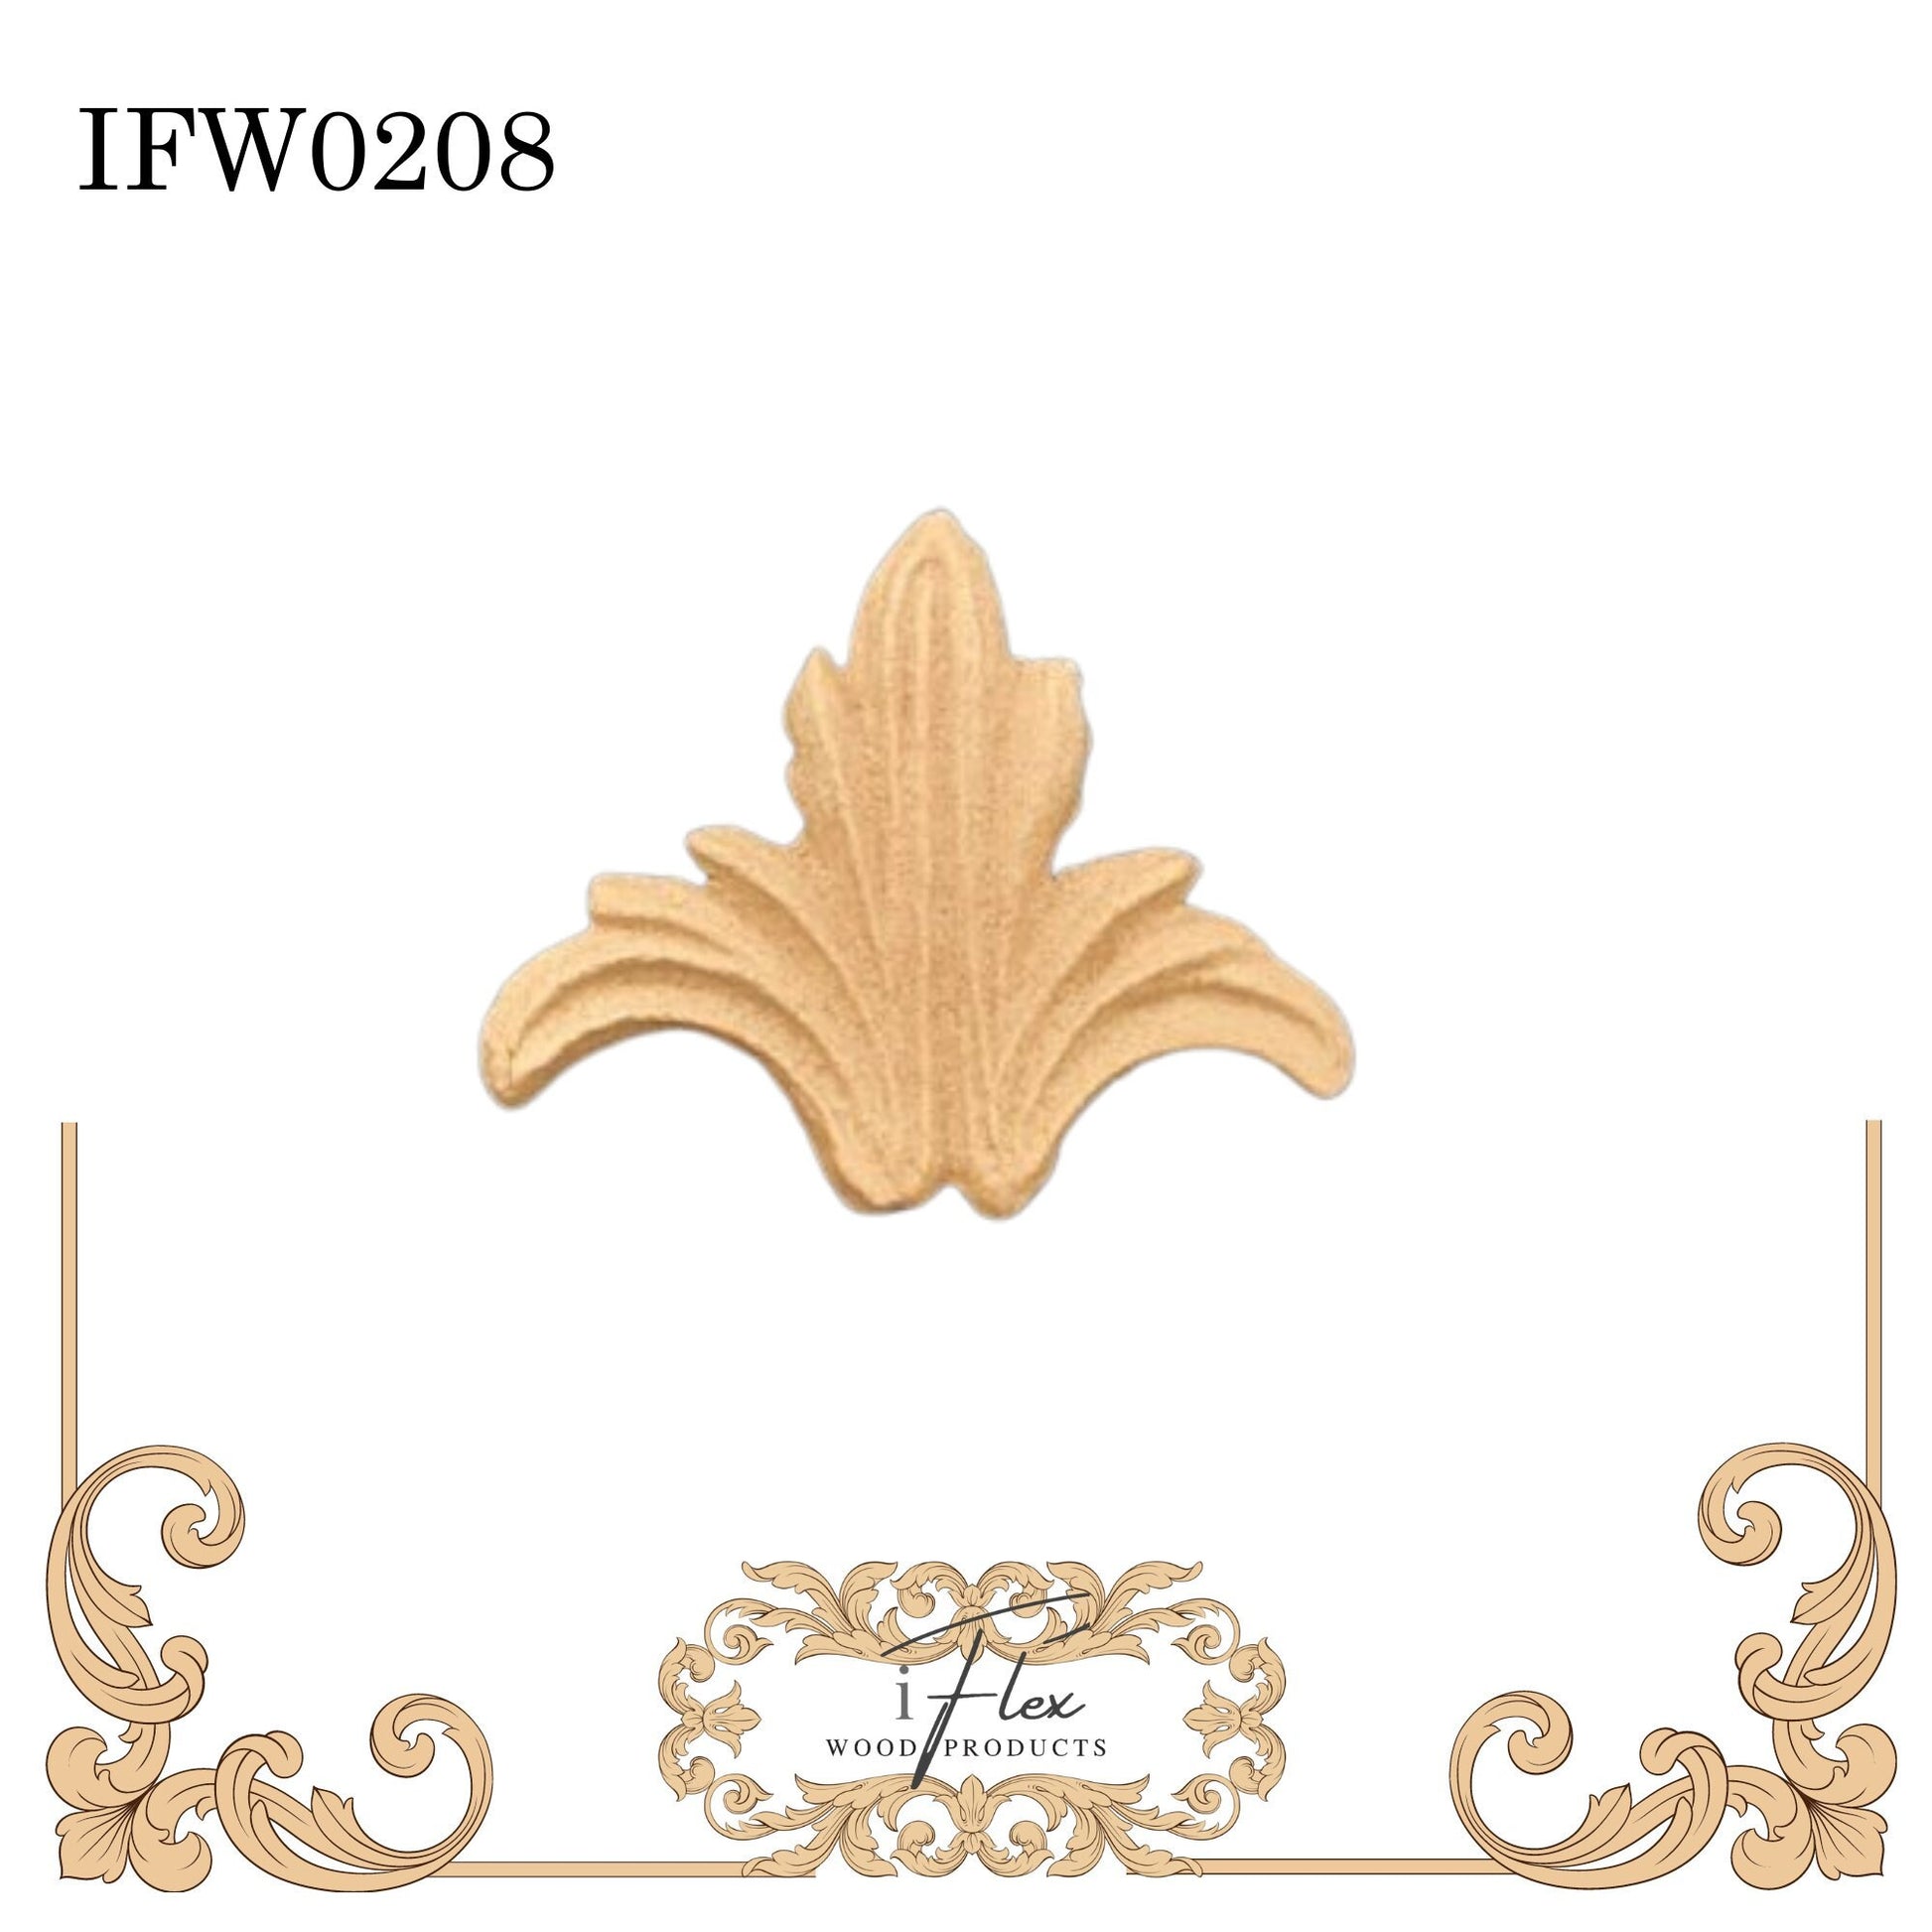 IFW 0208  iFlex Wood Products Plume, Centerpiece bendable mouldings, flexible, wooden appliques